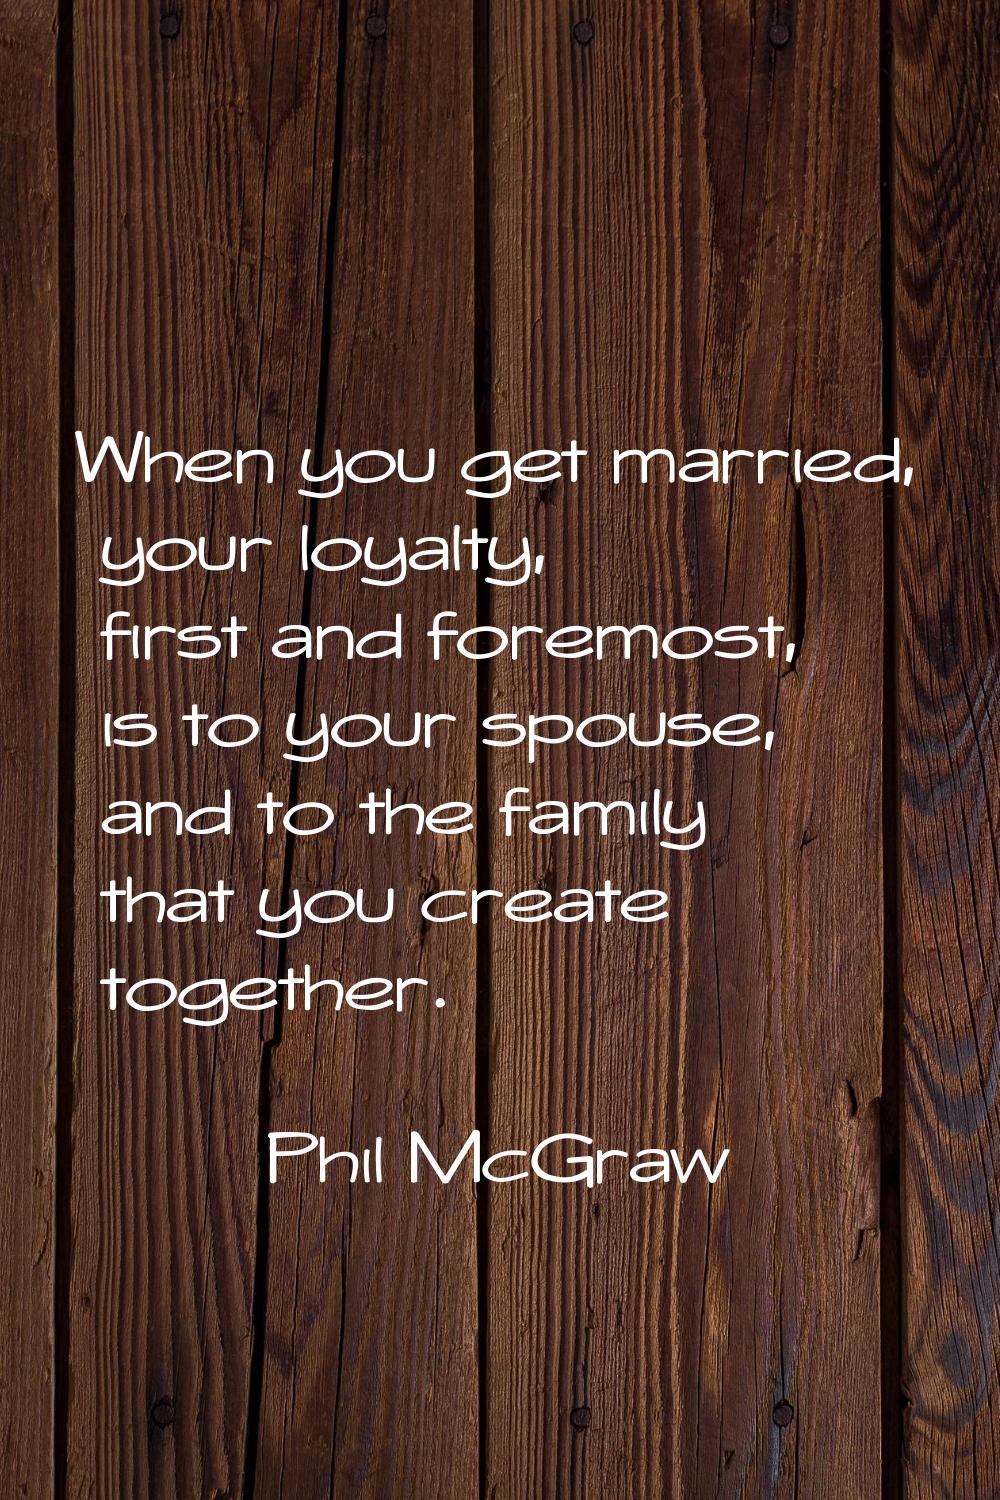 When you get married, your loyalty, first and foremost, is to your spouse, and to the family that y